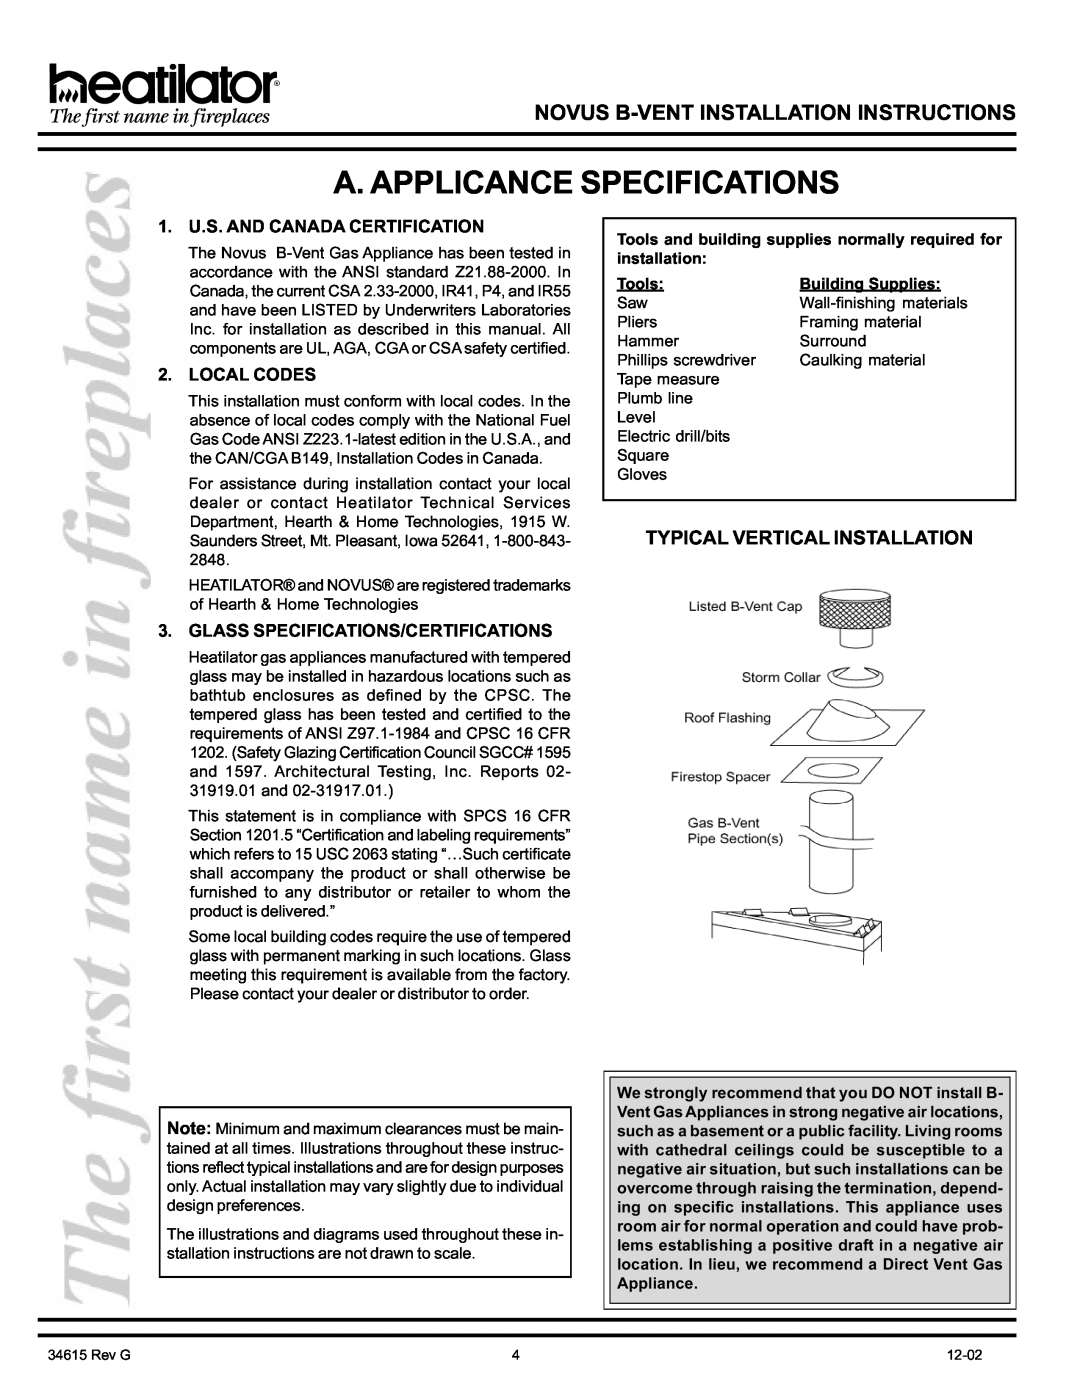 Hearth and Home Technologies GNBC36 manual A. Applicance Specifications, Typical Vertical Installation, Local Codes, Tools 